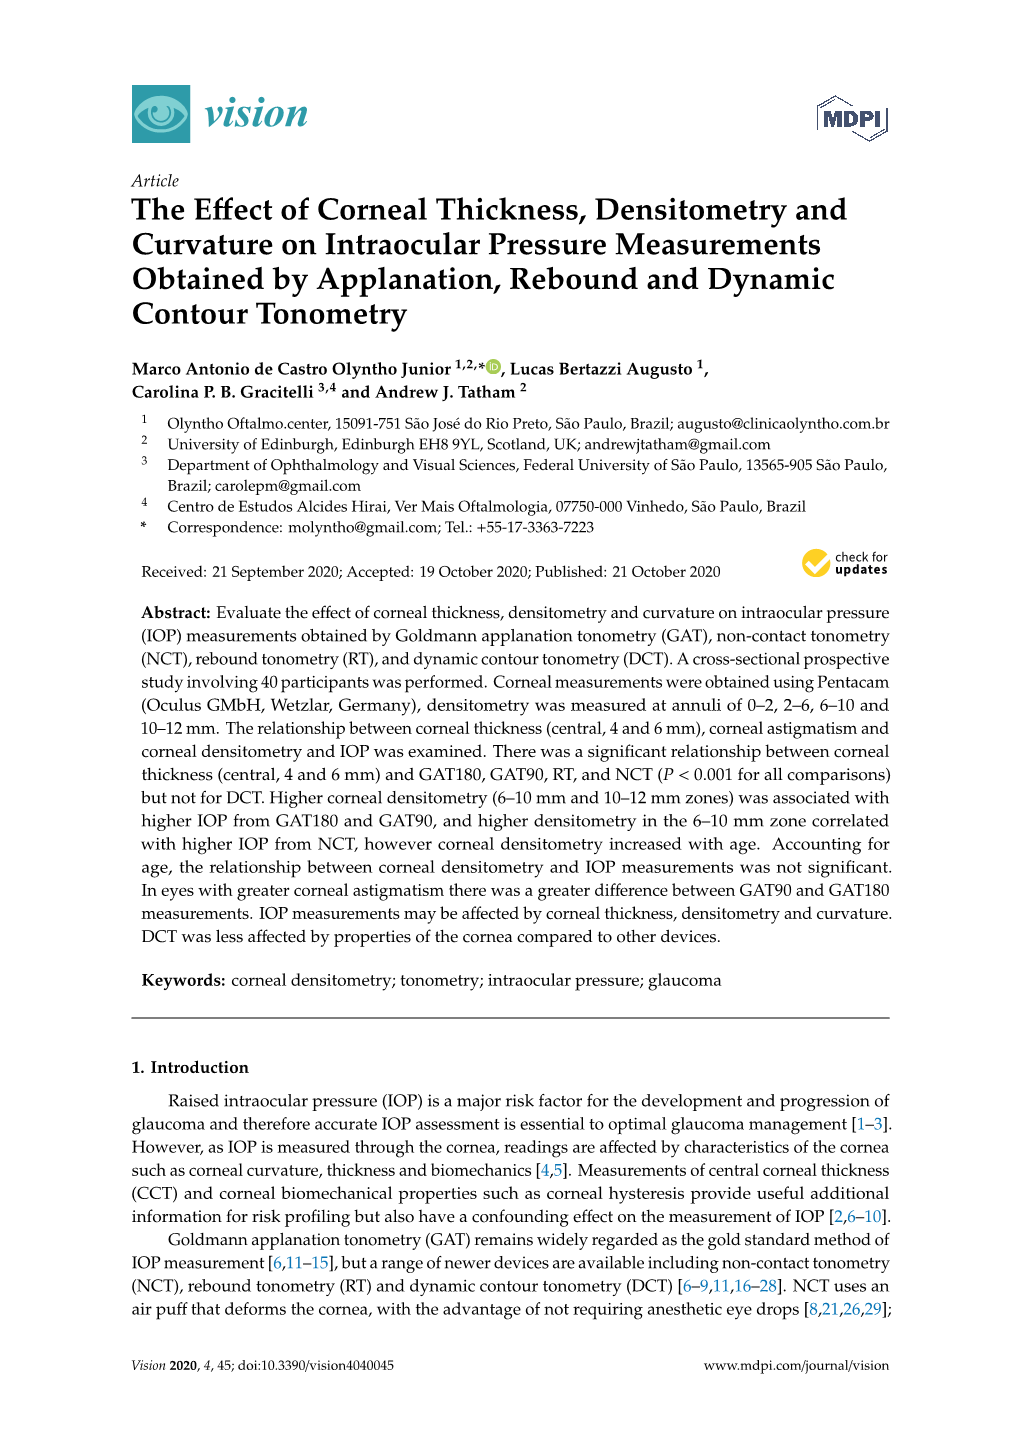 The Effect of Corneal Thickness, Densitometry and Curvature on Intraocular Pressure Measurements Obtained by Applanation, Reboun